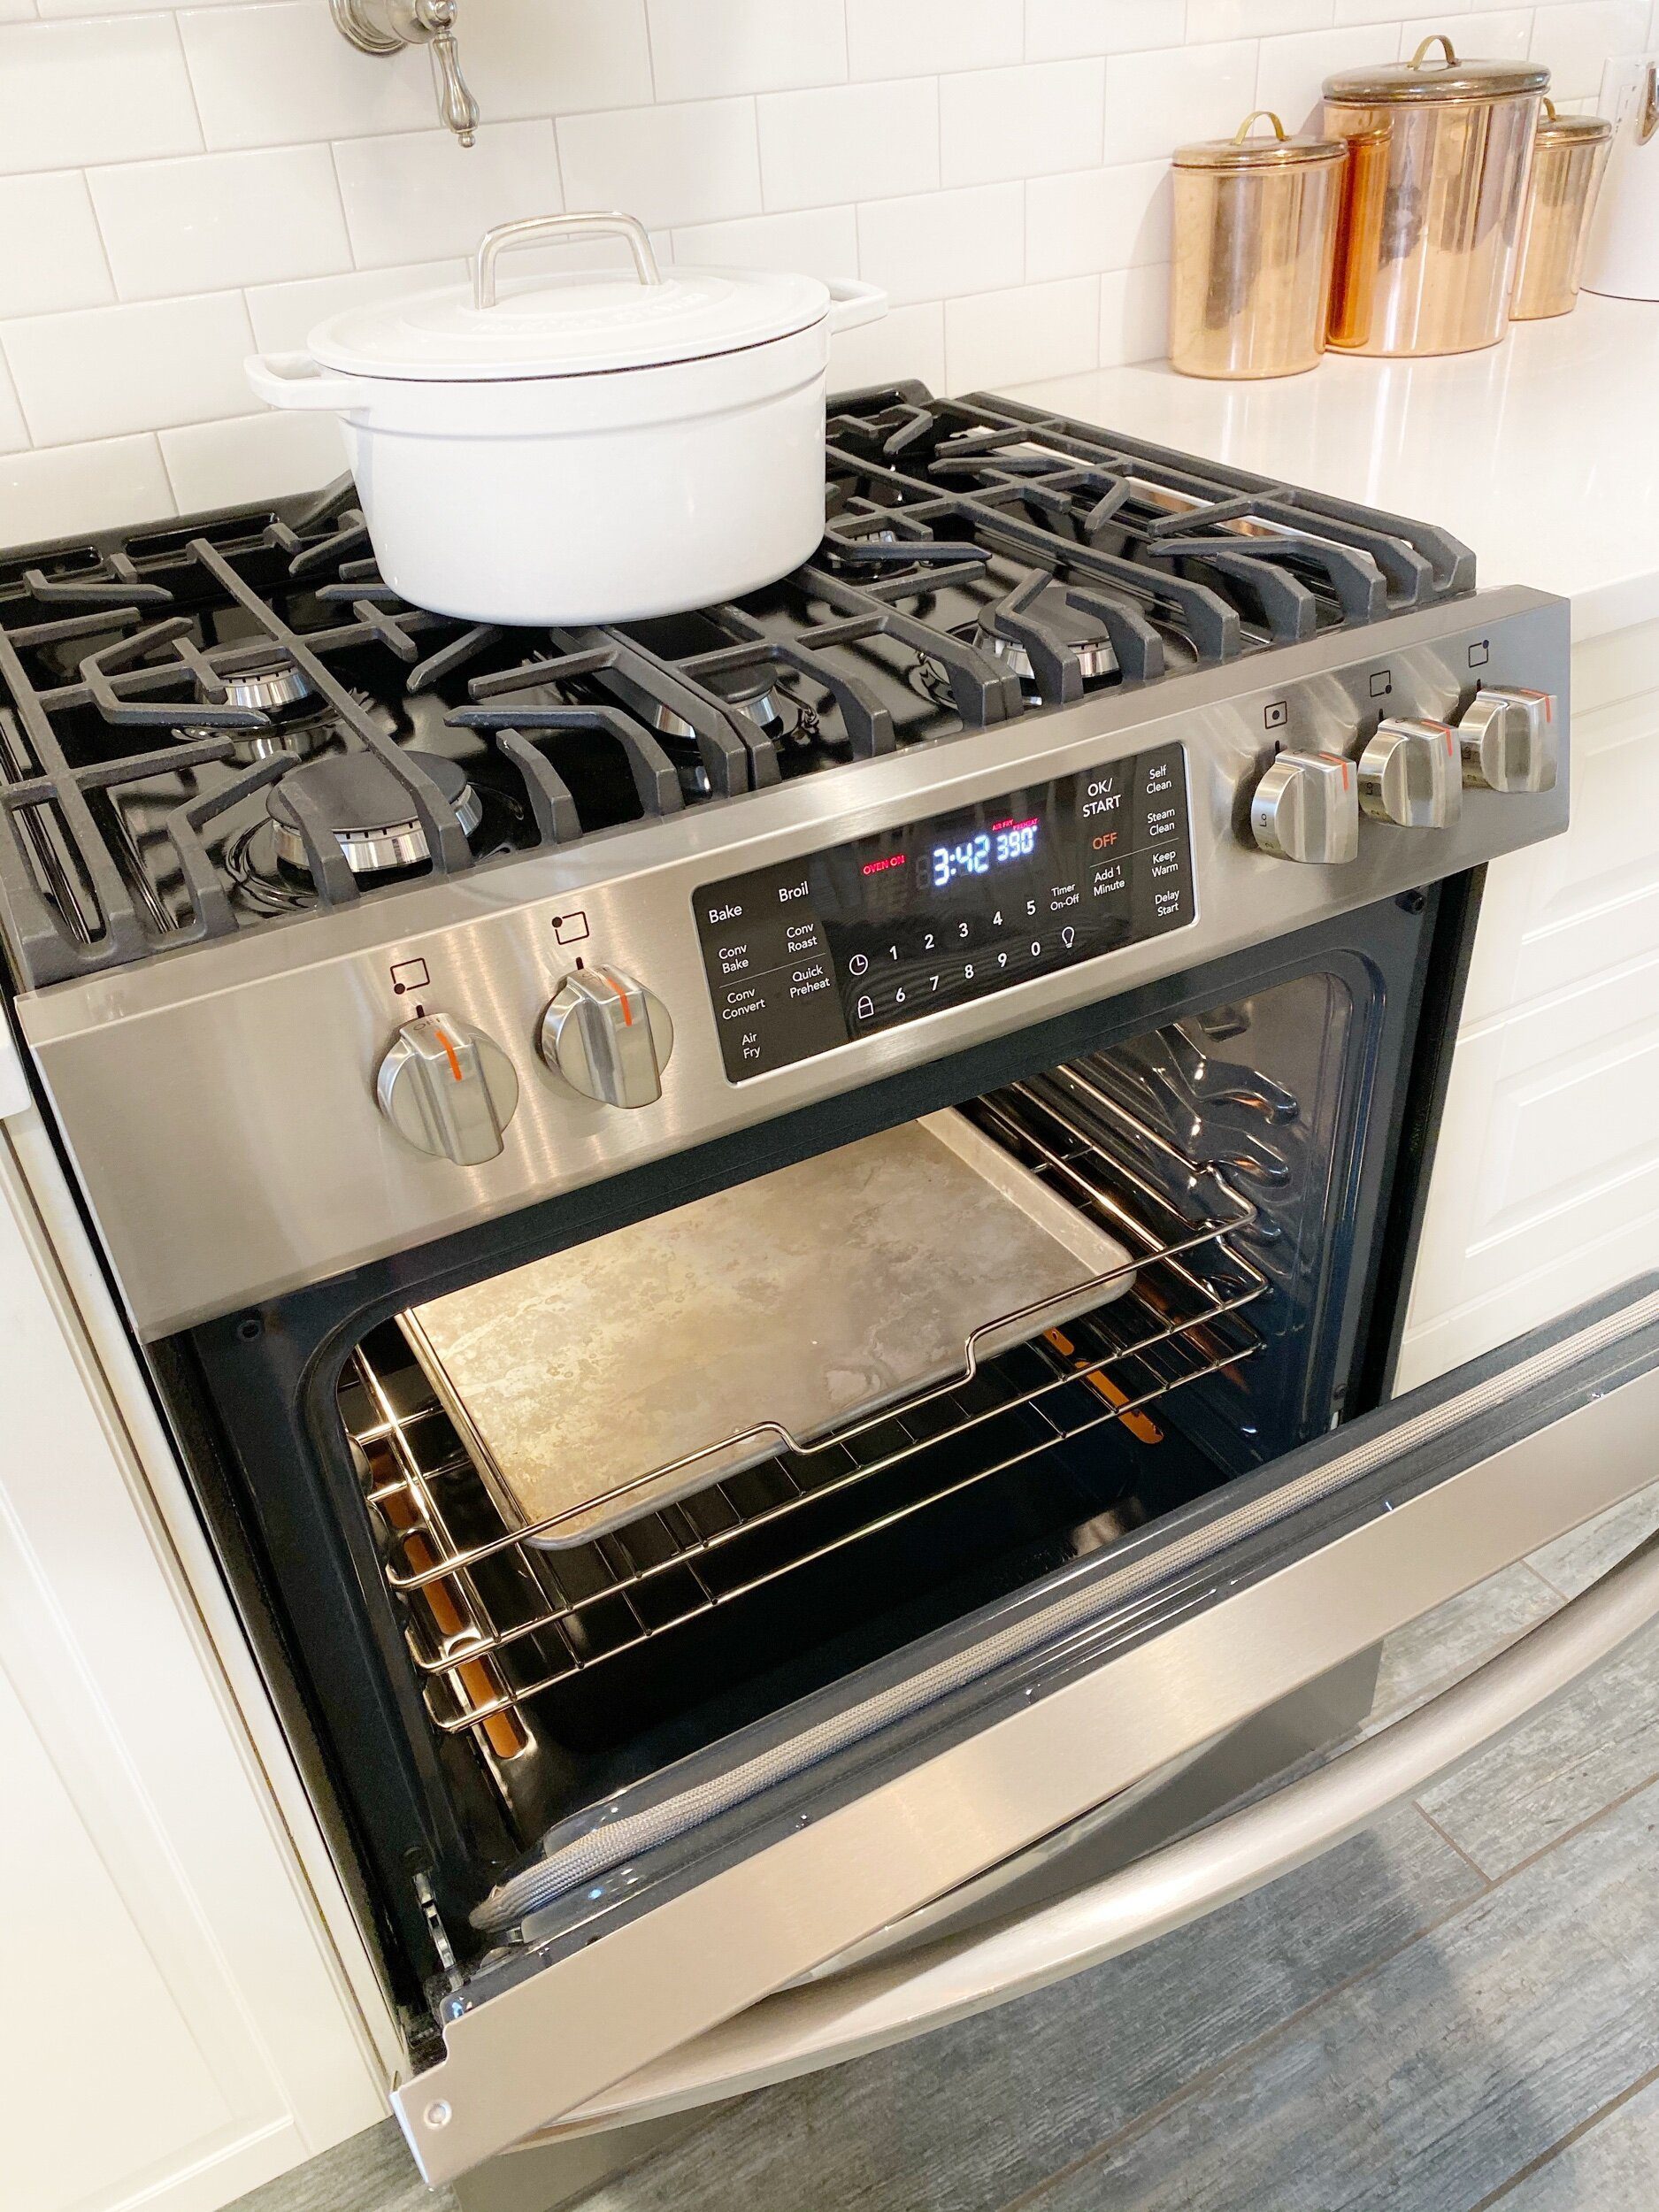 What is an Air Frying Oven? - Frigidaire